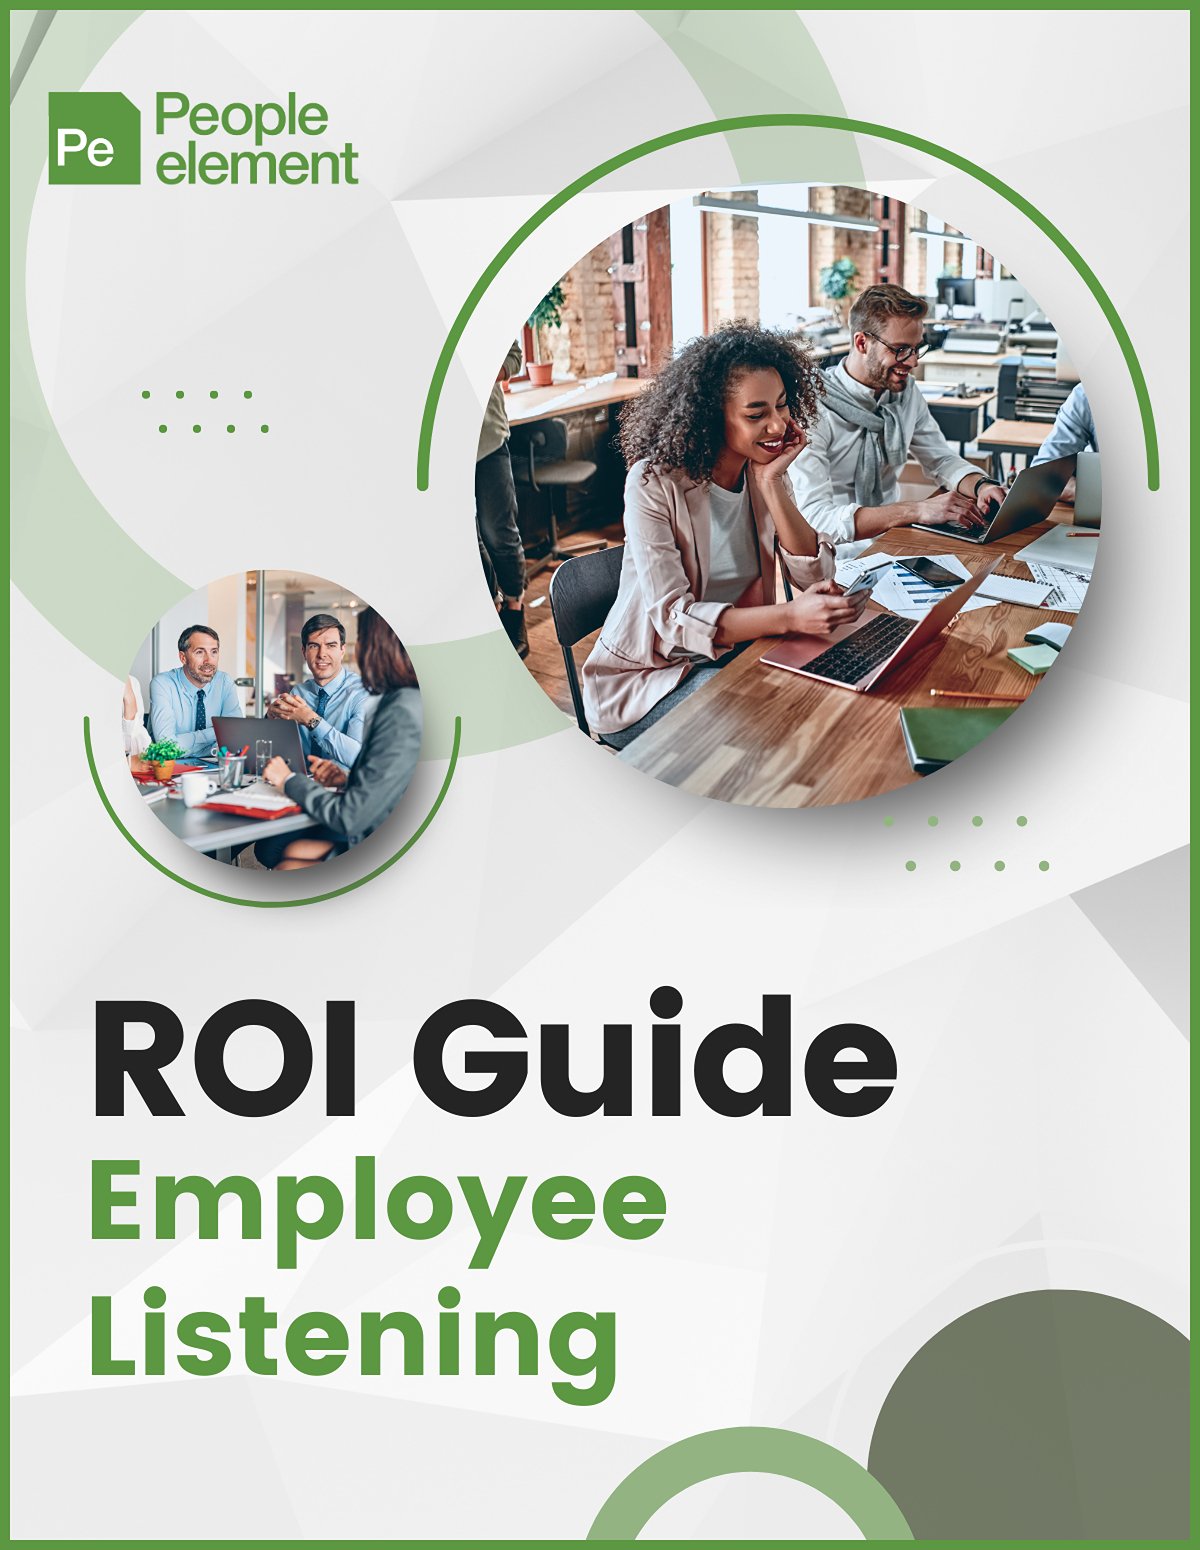 The Guide to Driving ROI through Employee Listening